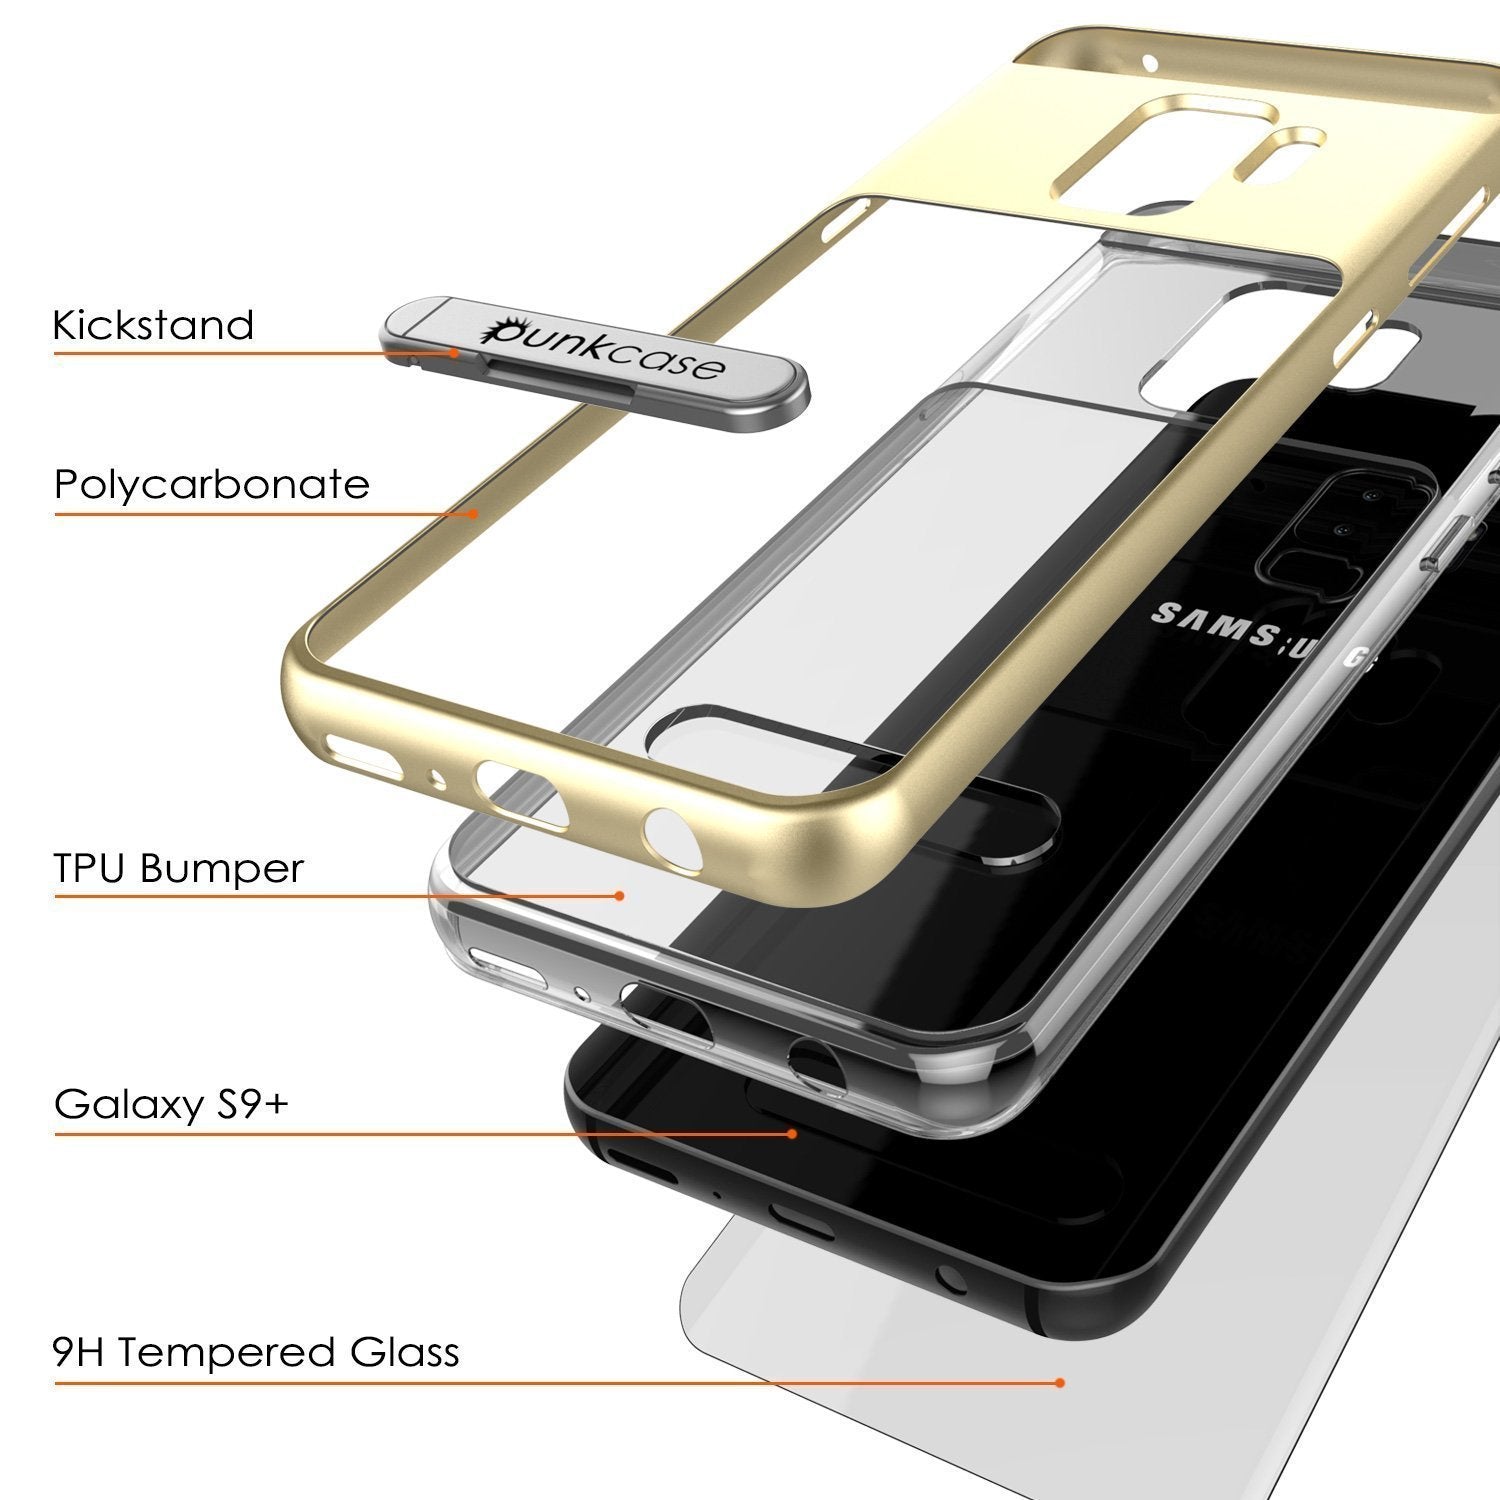 Galaxy S10+ Plus Case, PUNKcase [LUCID 3.0 Series] [Slim Fit] Armor Cover w/ Integrated Screen Protector [Gold]